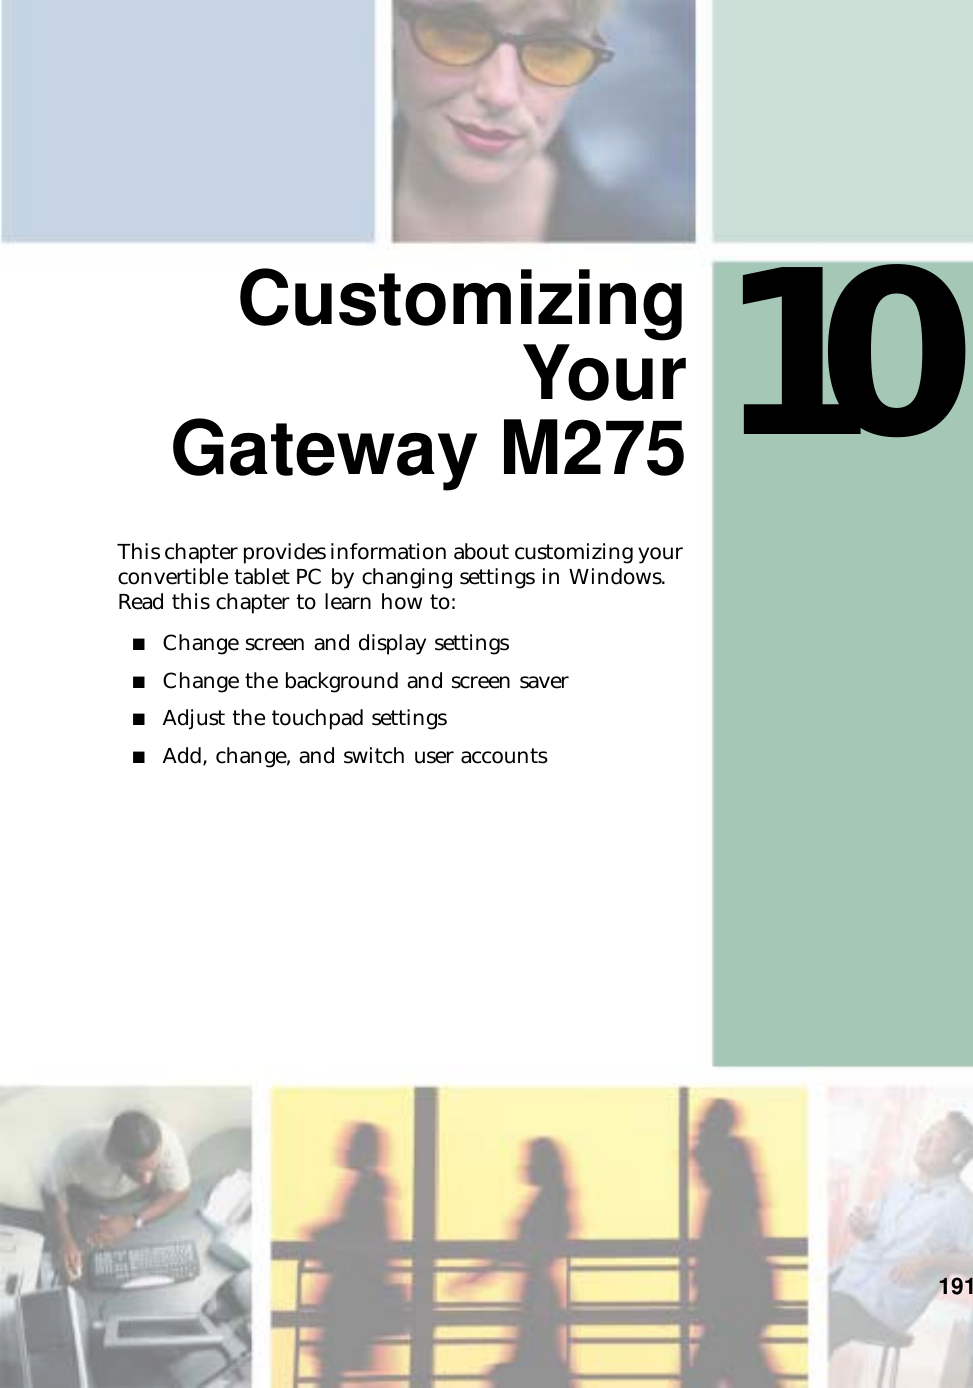 10191CustomizingYourGateway M275This chapter provides information about customizing your convertible tablet PC by changing settings in Windows. Read this chapter to learn how to:■Change screen and display settings■Change the background and screen saver■Adjust the touchpad settings■Add, change, and switch user accounts